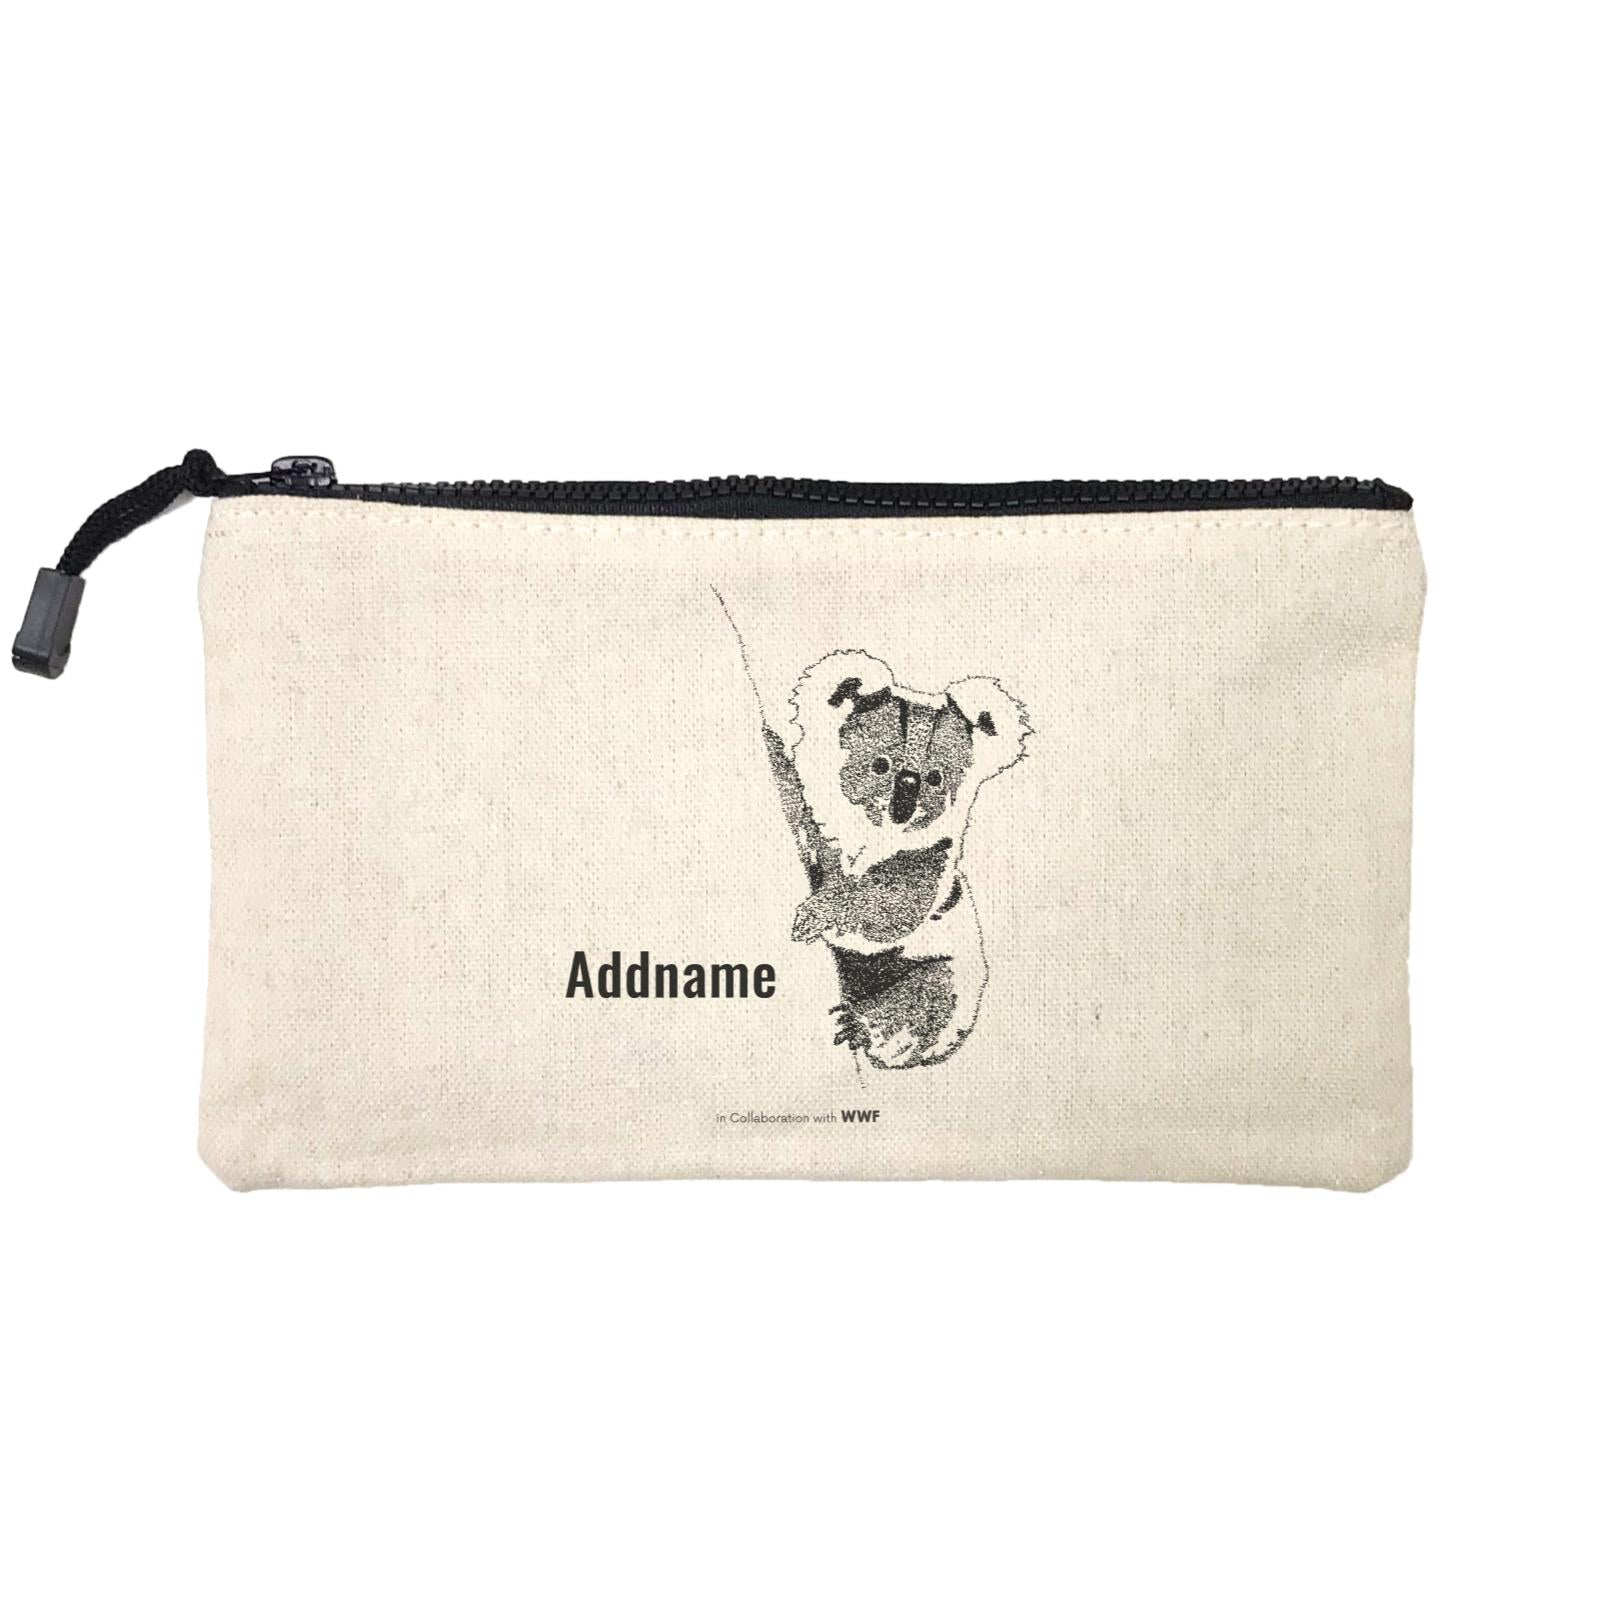 Hand Written Animals Koala By ArtC Addname Mini Accessories Stationery Pouch